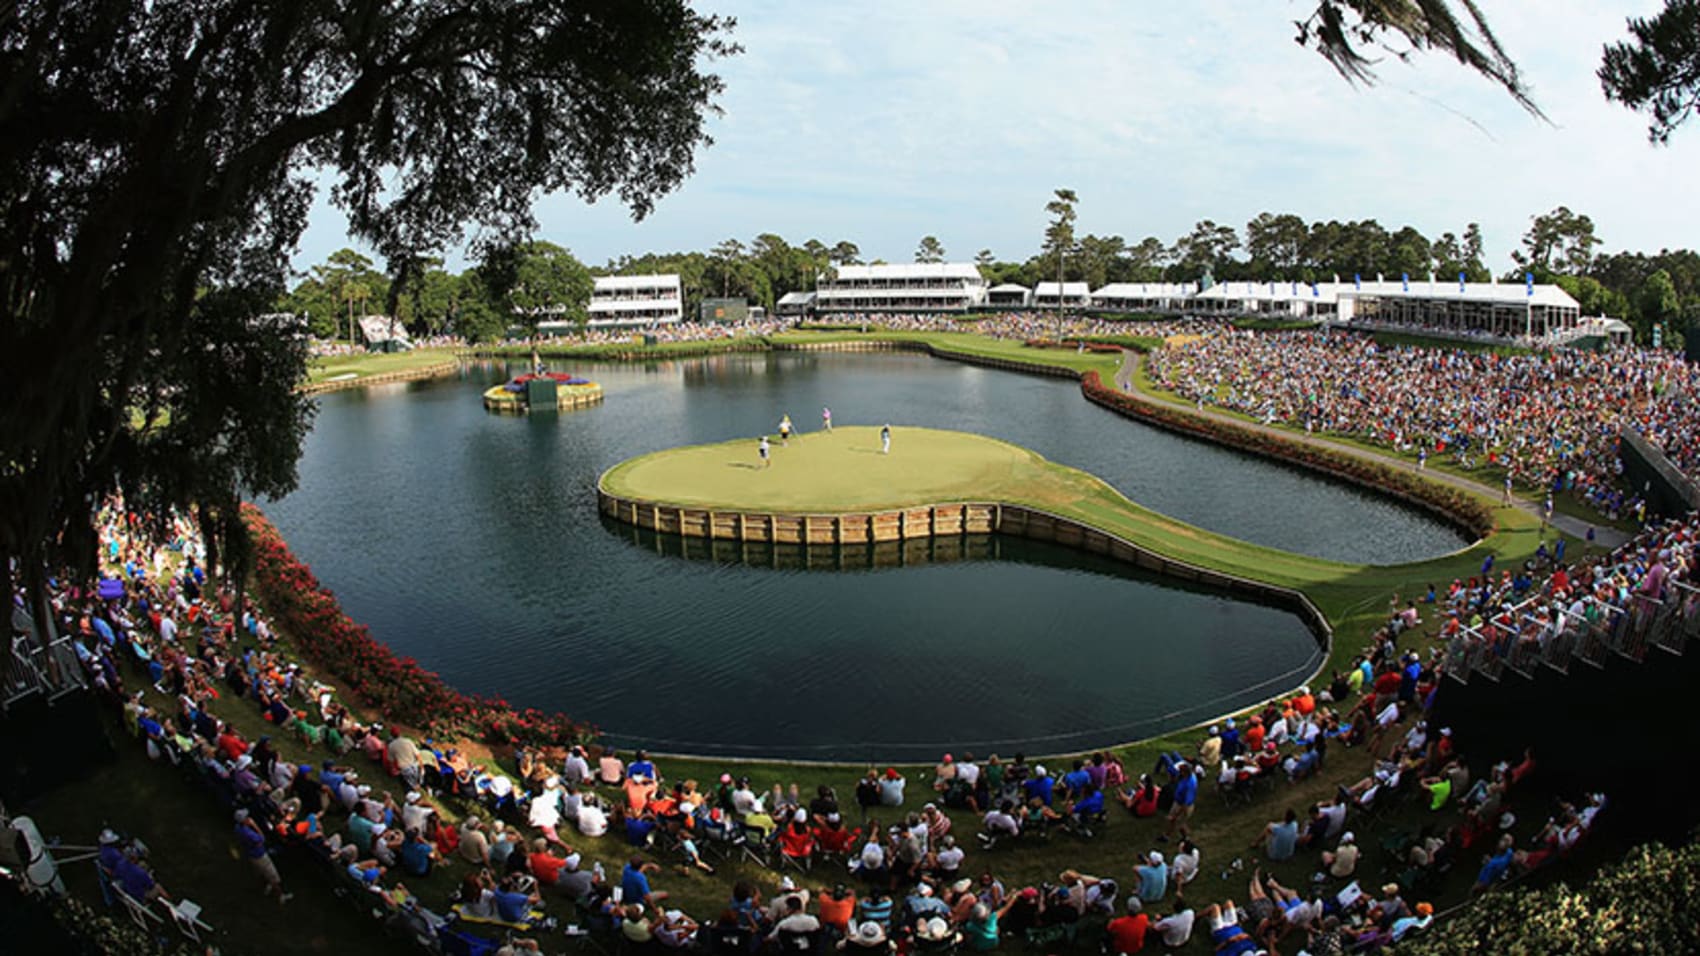 THE PLAYERS Championship